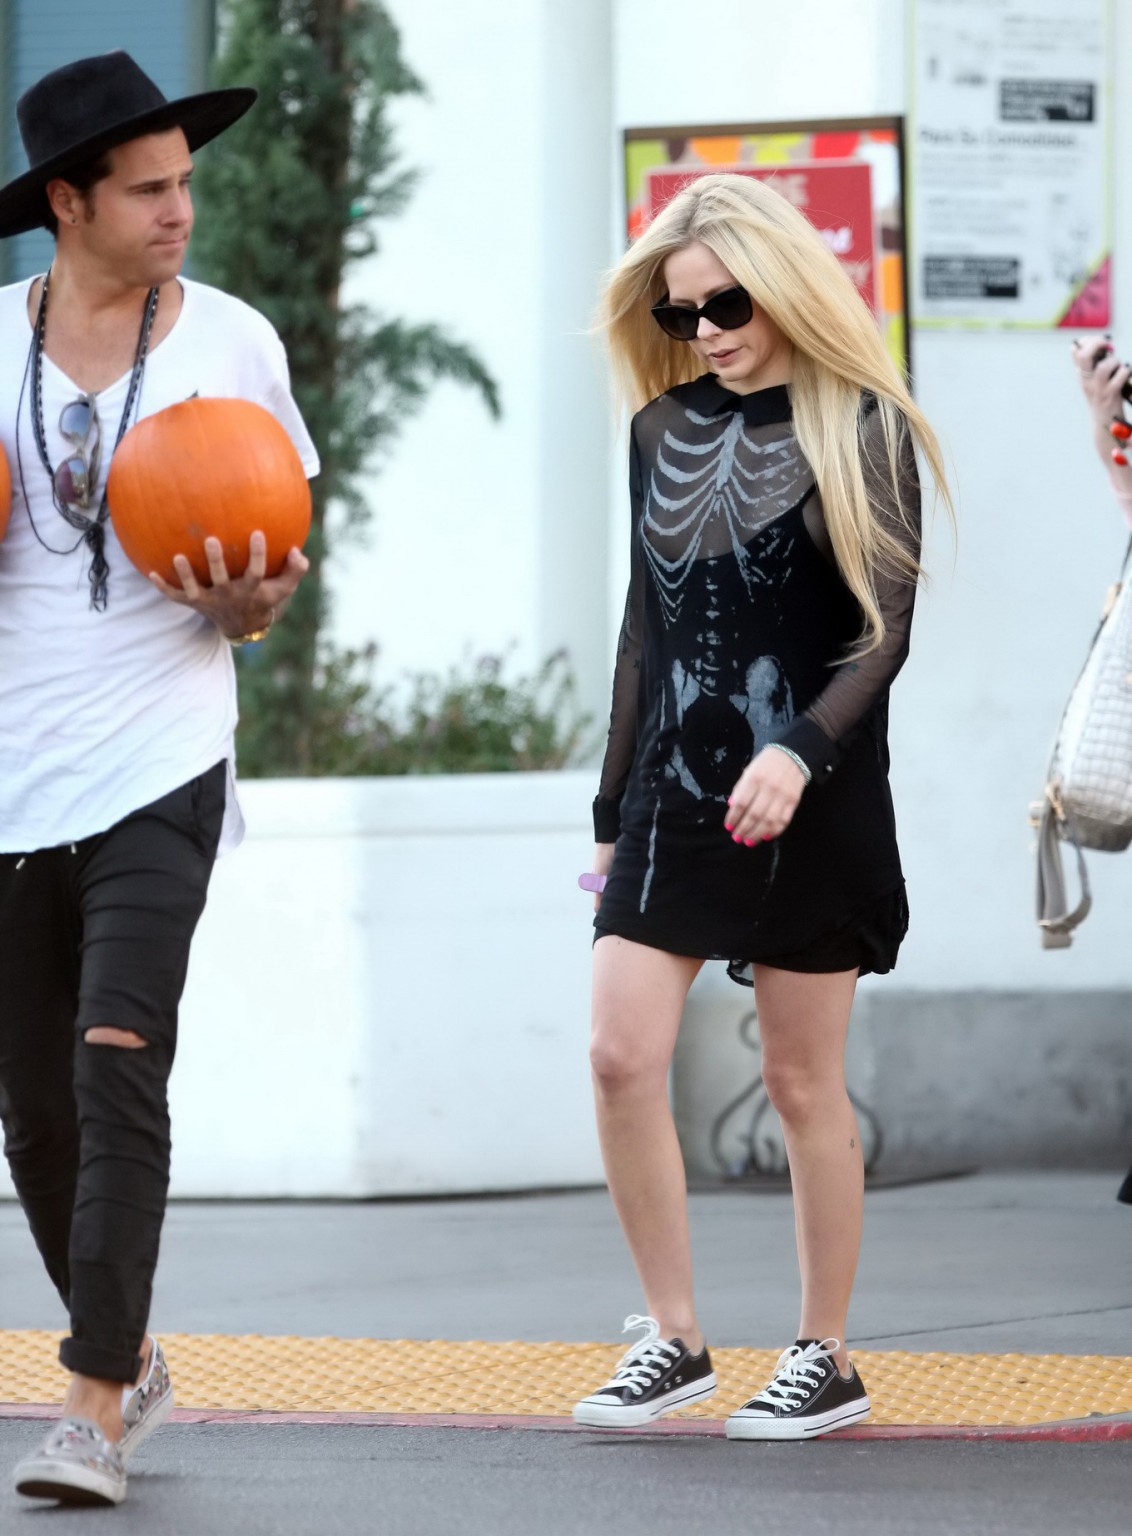 Avril Lavigne skeleton costume malfunction and ass show #75150910